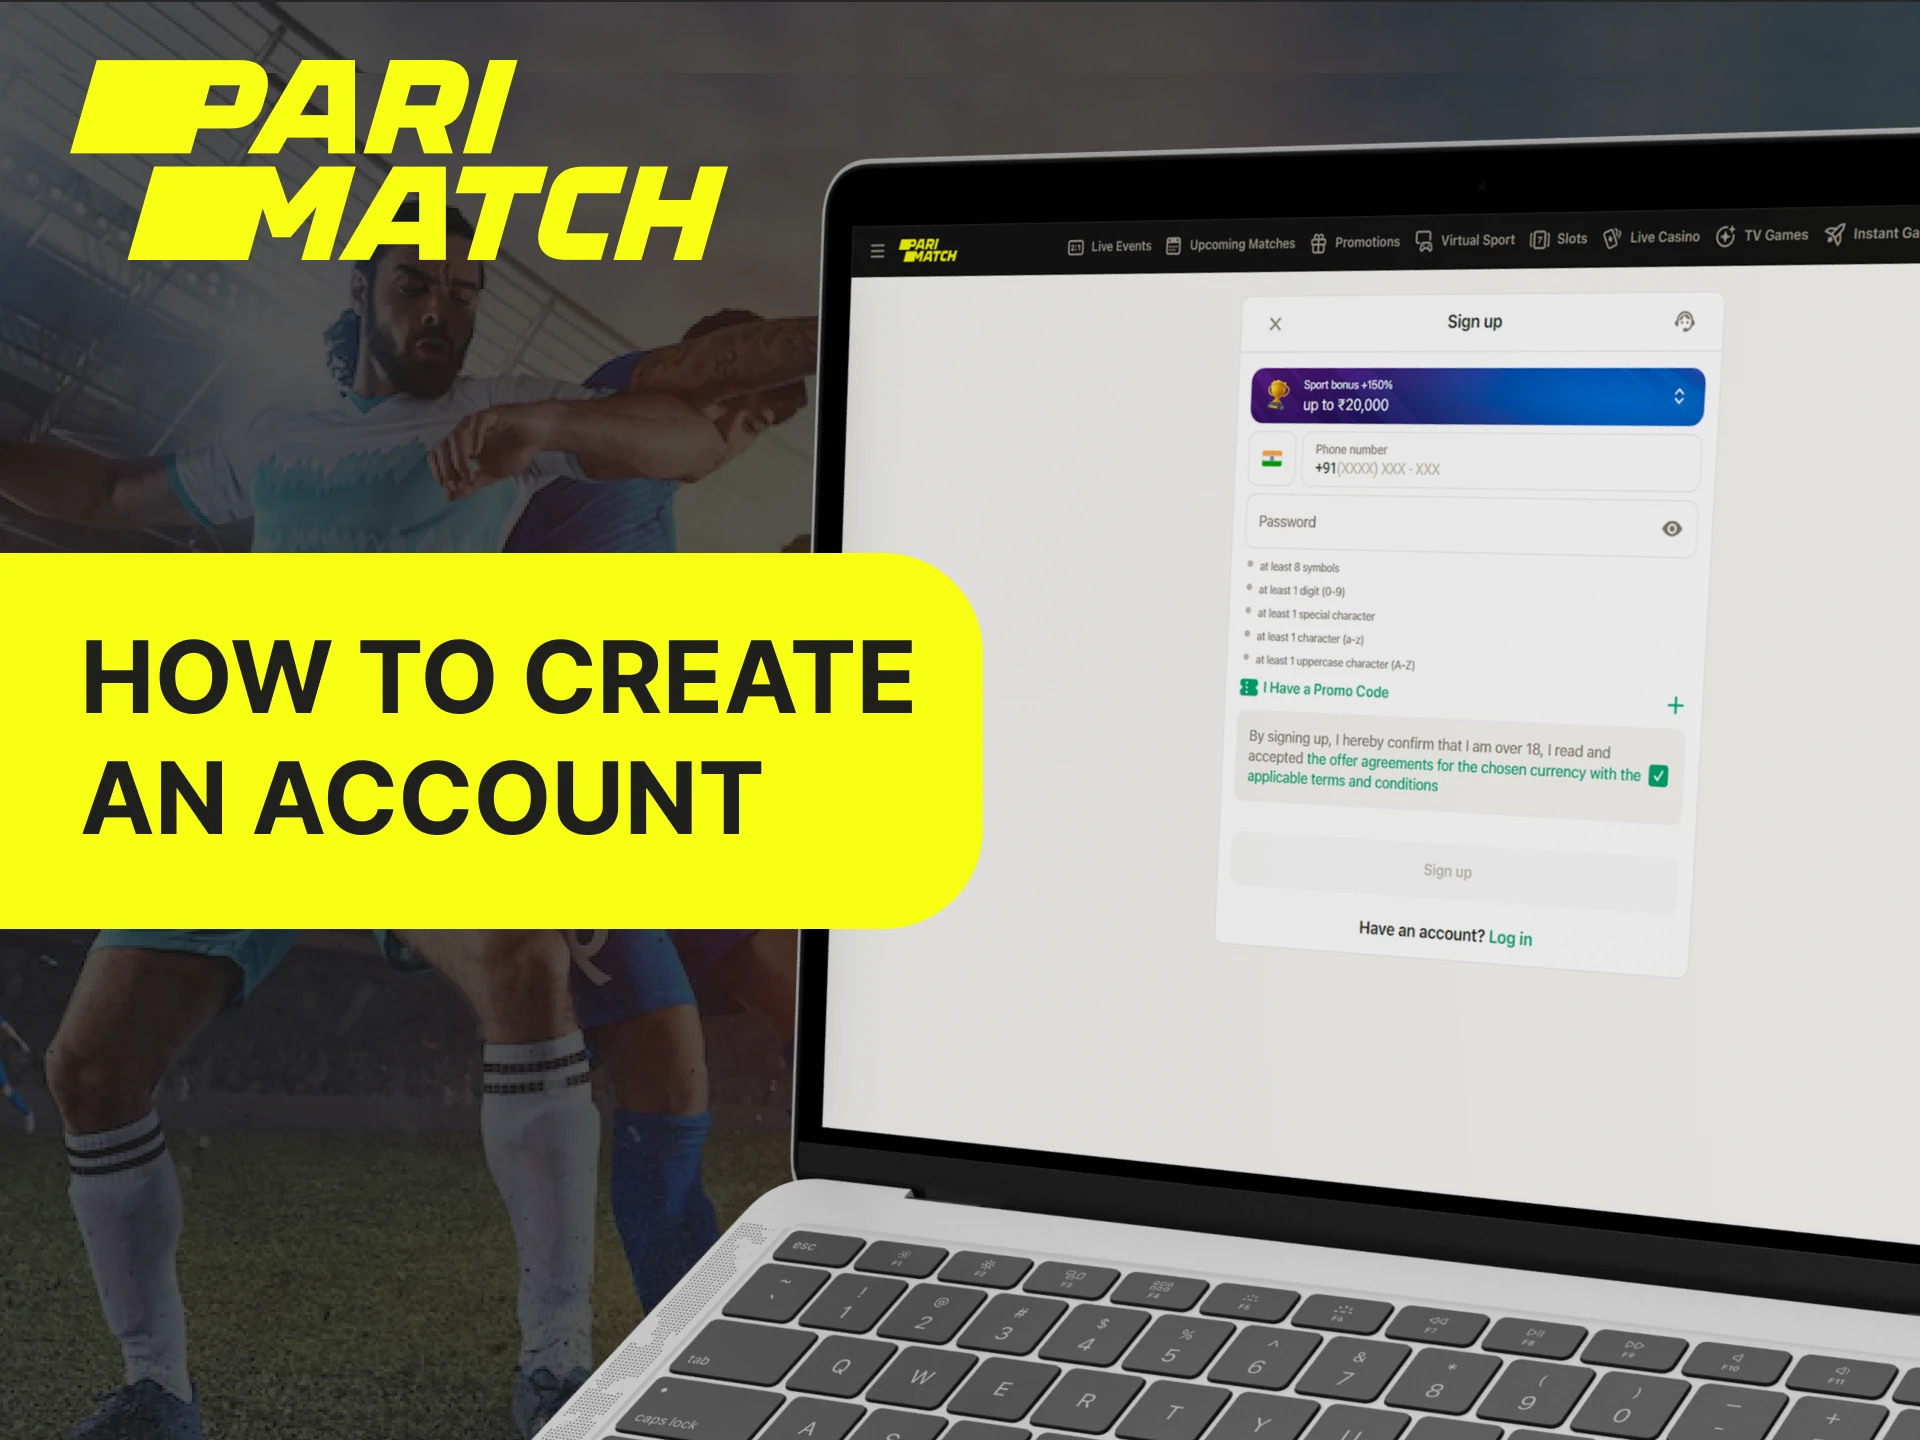 Registration with Parimatch does not take much time and is simple.